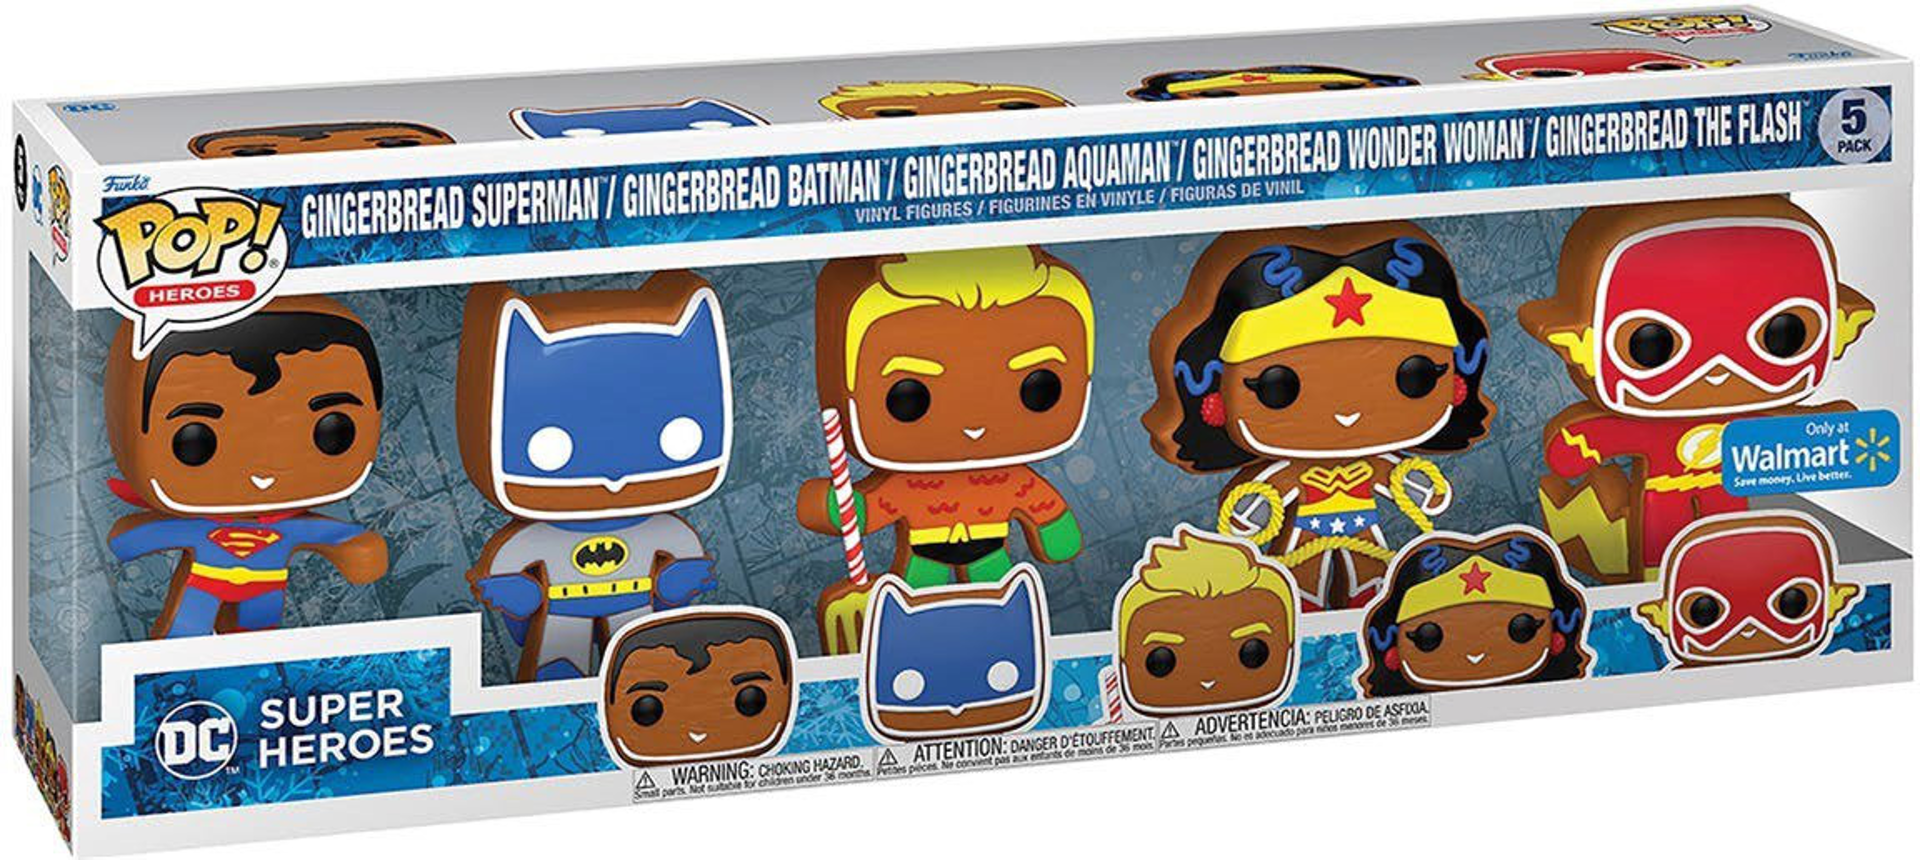 Funko Pop! 5-Pack: Heroes: DC Holiday - Gingerbread Superman / Gingerbread Batman / Gingerbread Aquaman / Gingerbread Wonder Woman / Gingerbread The Flash (Special Edition)